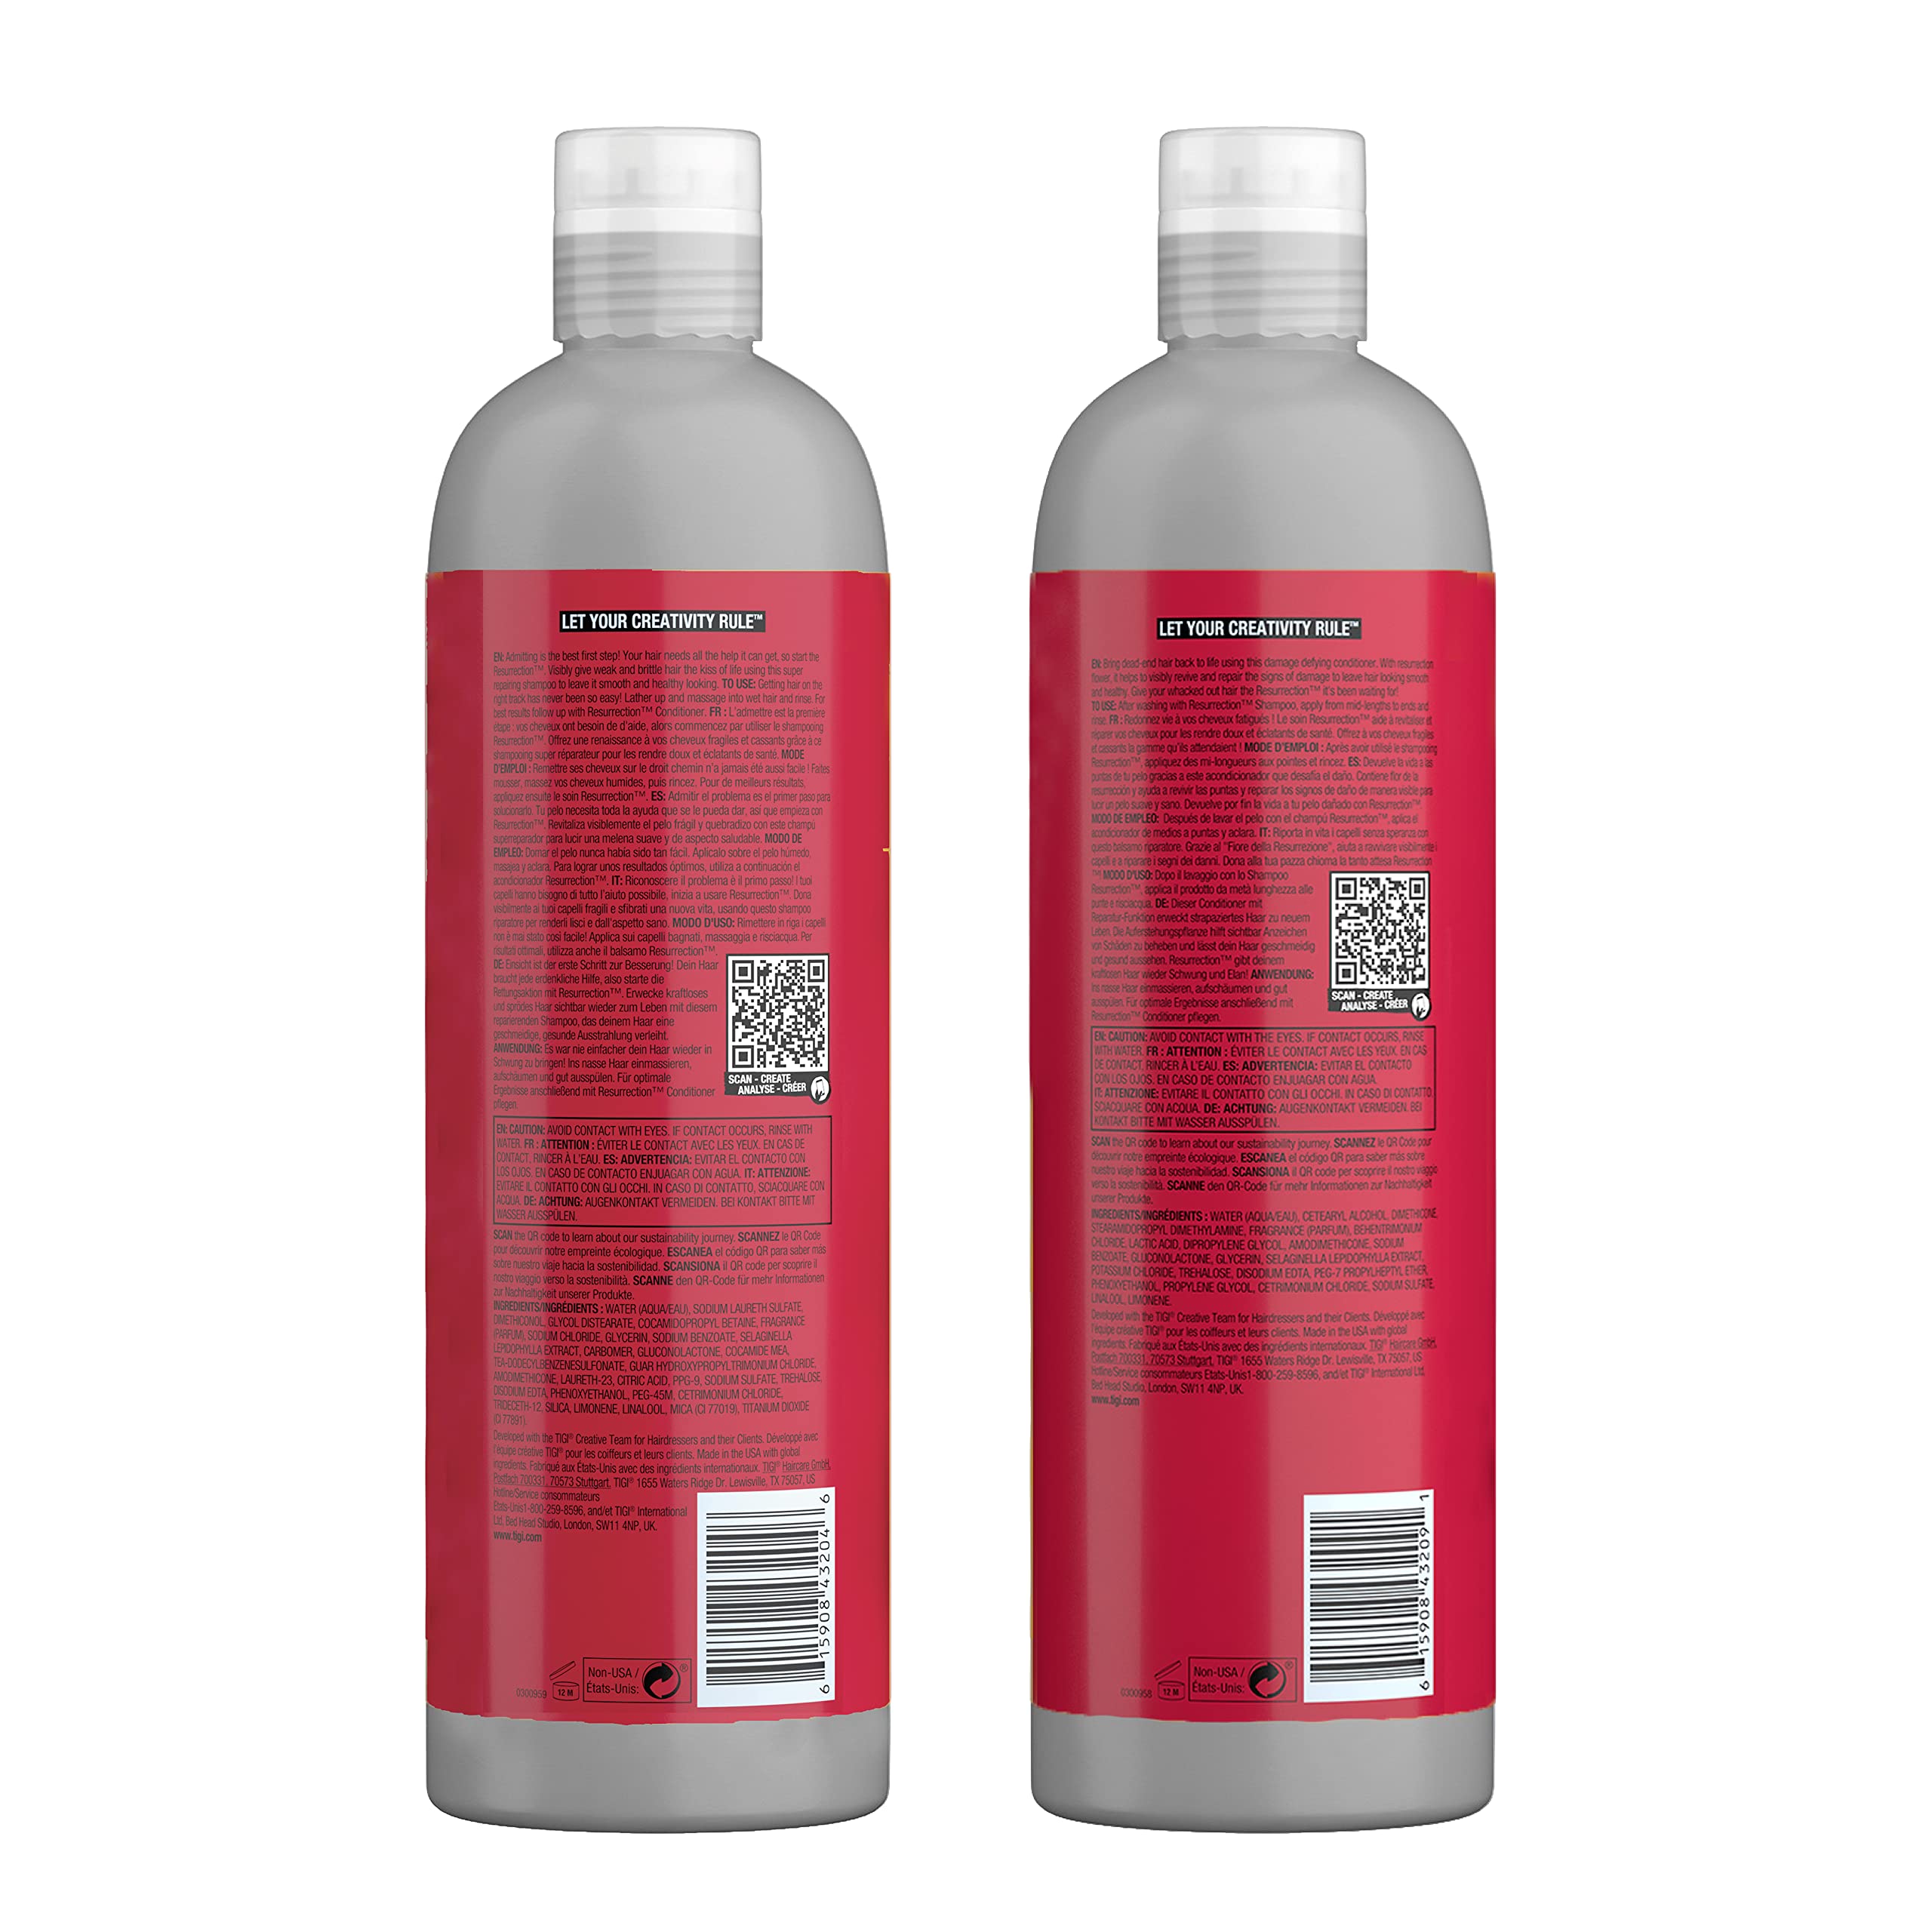 Bed Head by TIGI Shampoo & Conditioner For Damaged Hair Resurrection Infused With The Resurrection Plant 2 x 25.36 fl oz